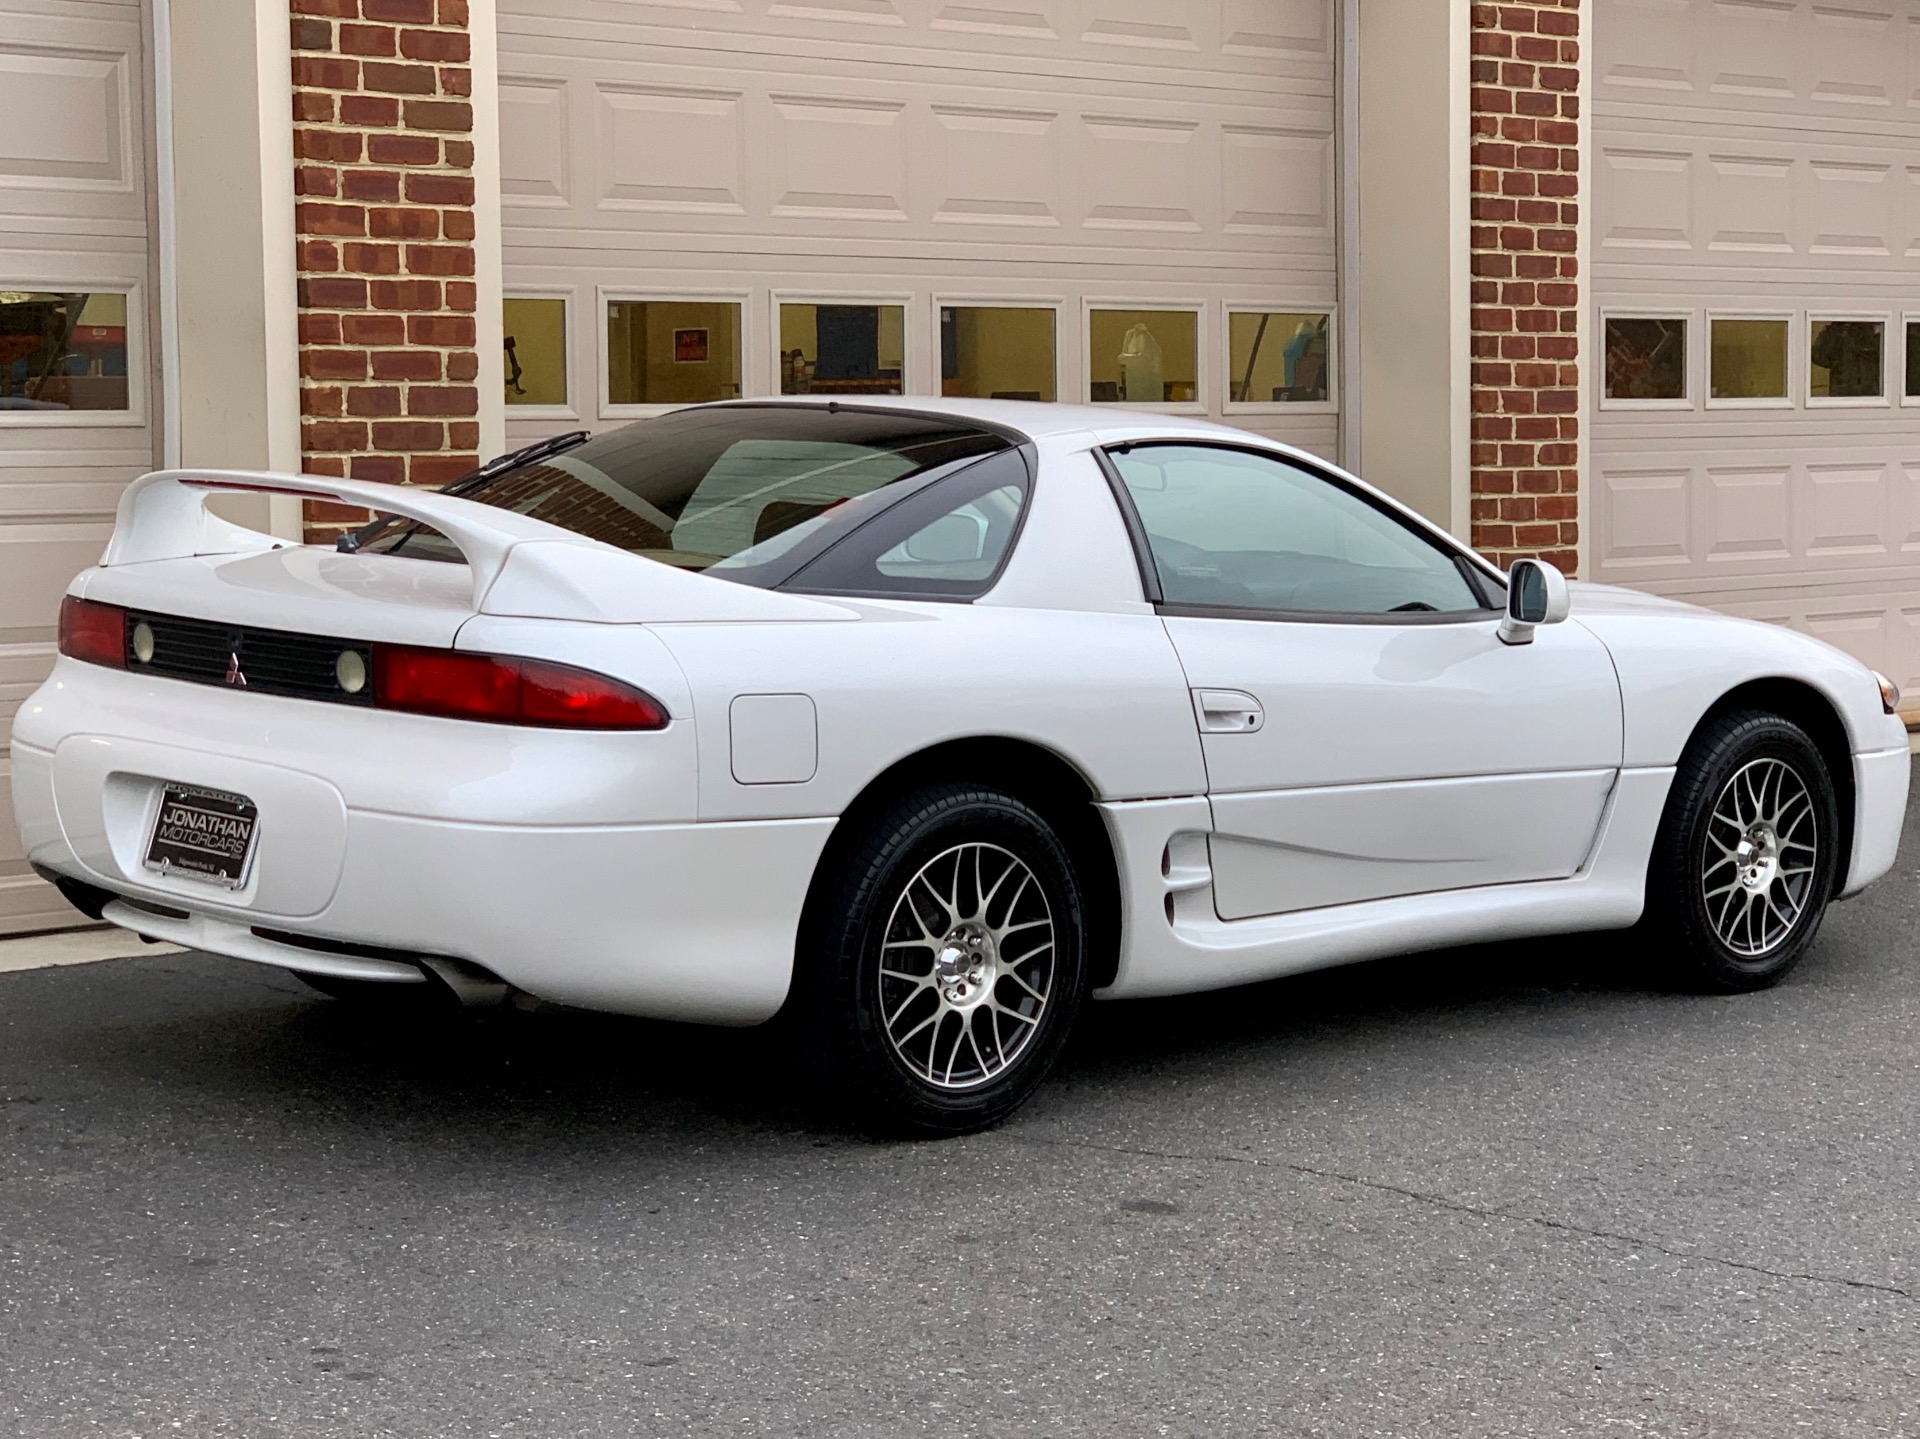 1999 Mitsubishi 3000GT Coupe Stock # 001125 for sale near Edgewater ...